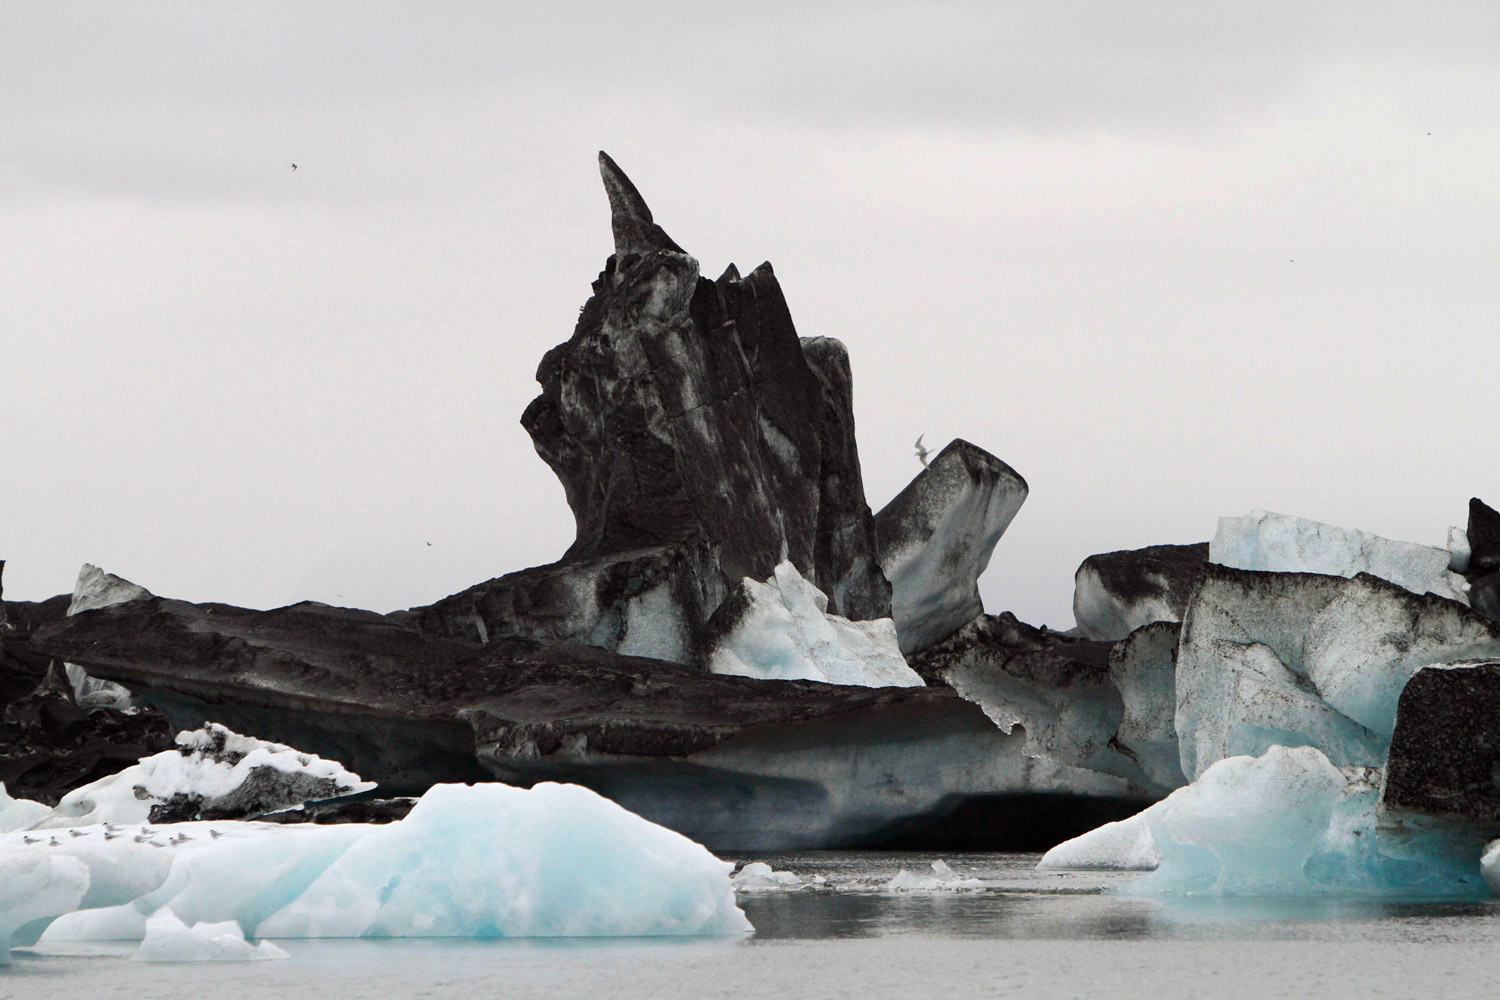 May 26, 2011. Icebergs covered in ash from the Grimsvotn volcano eruption, in the glacier lagoon at the base of Vatnajokull, Iceland.